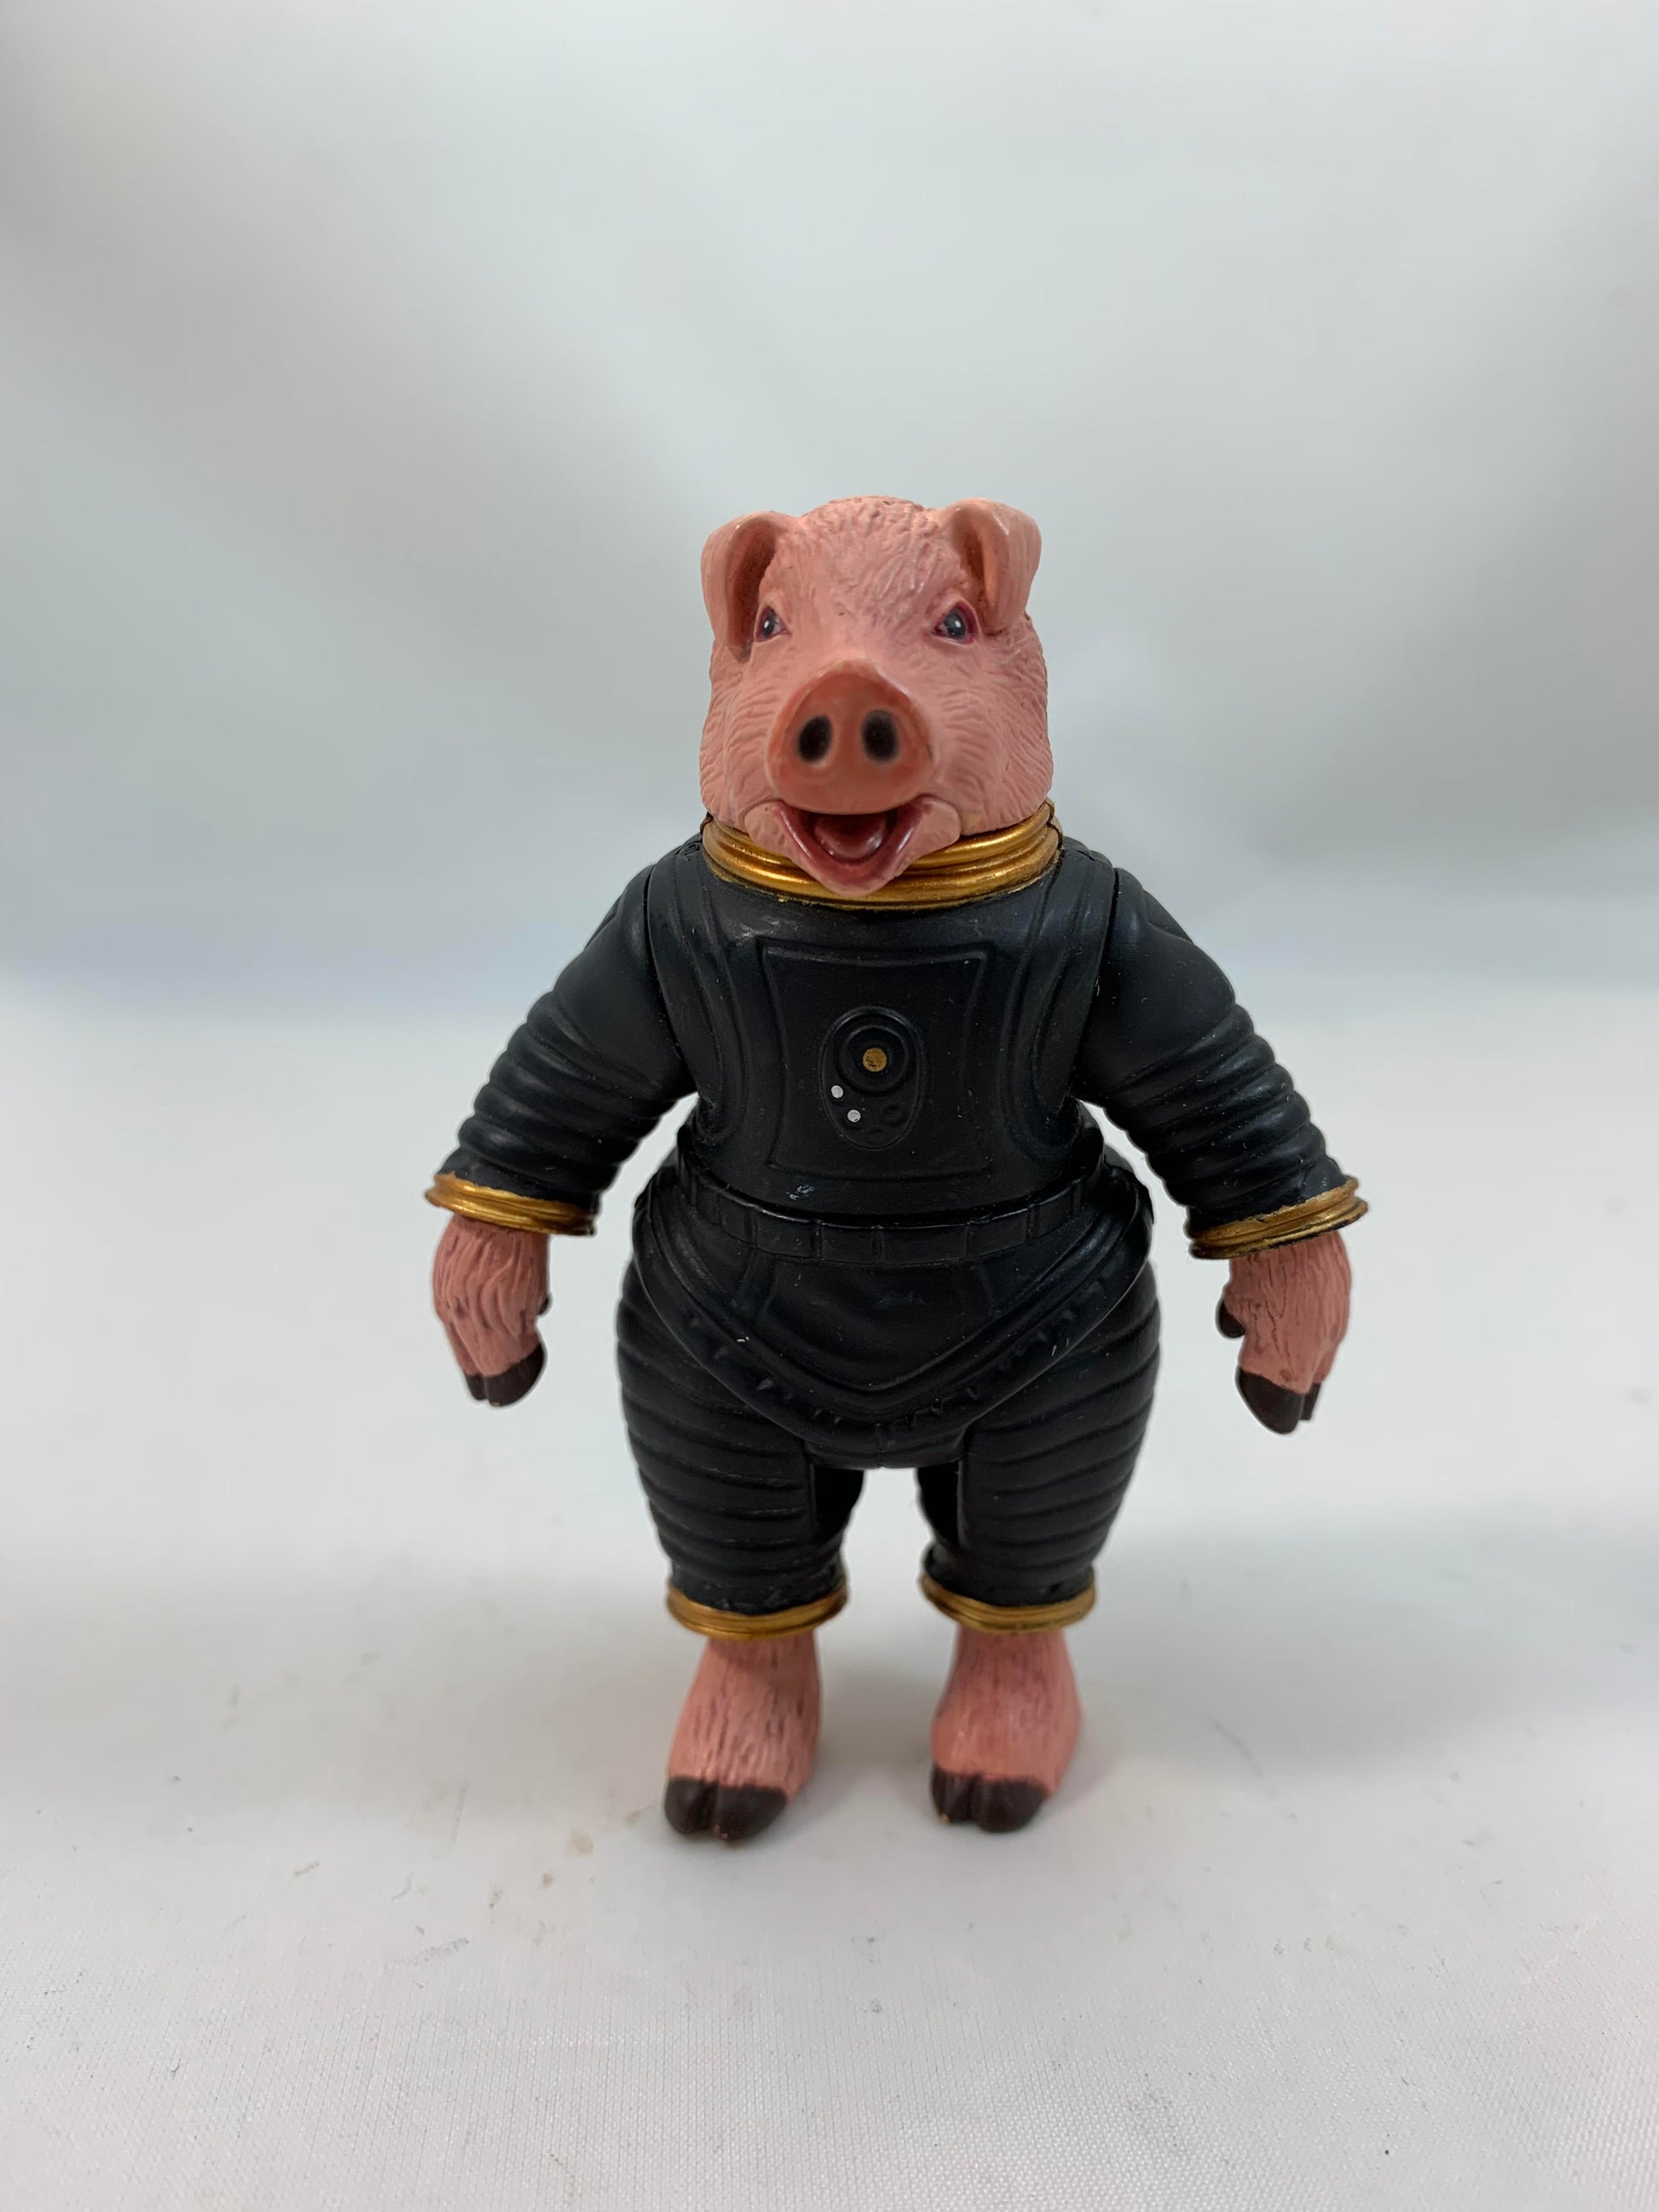 Character Options BBC Worldwide 2004 Dr. Who - Space Pig - Loose